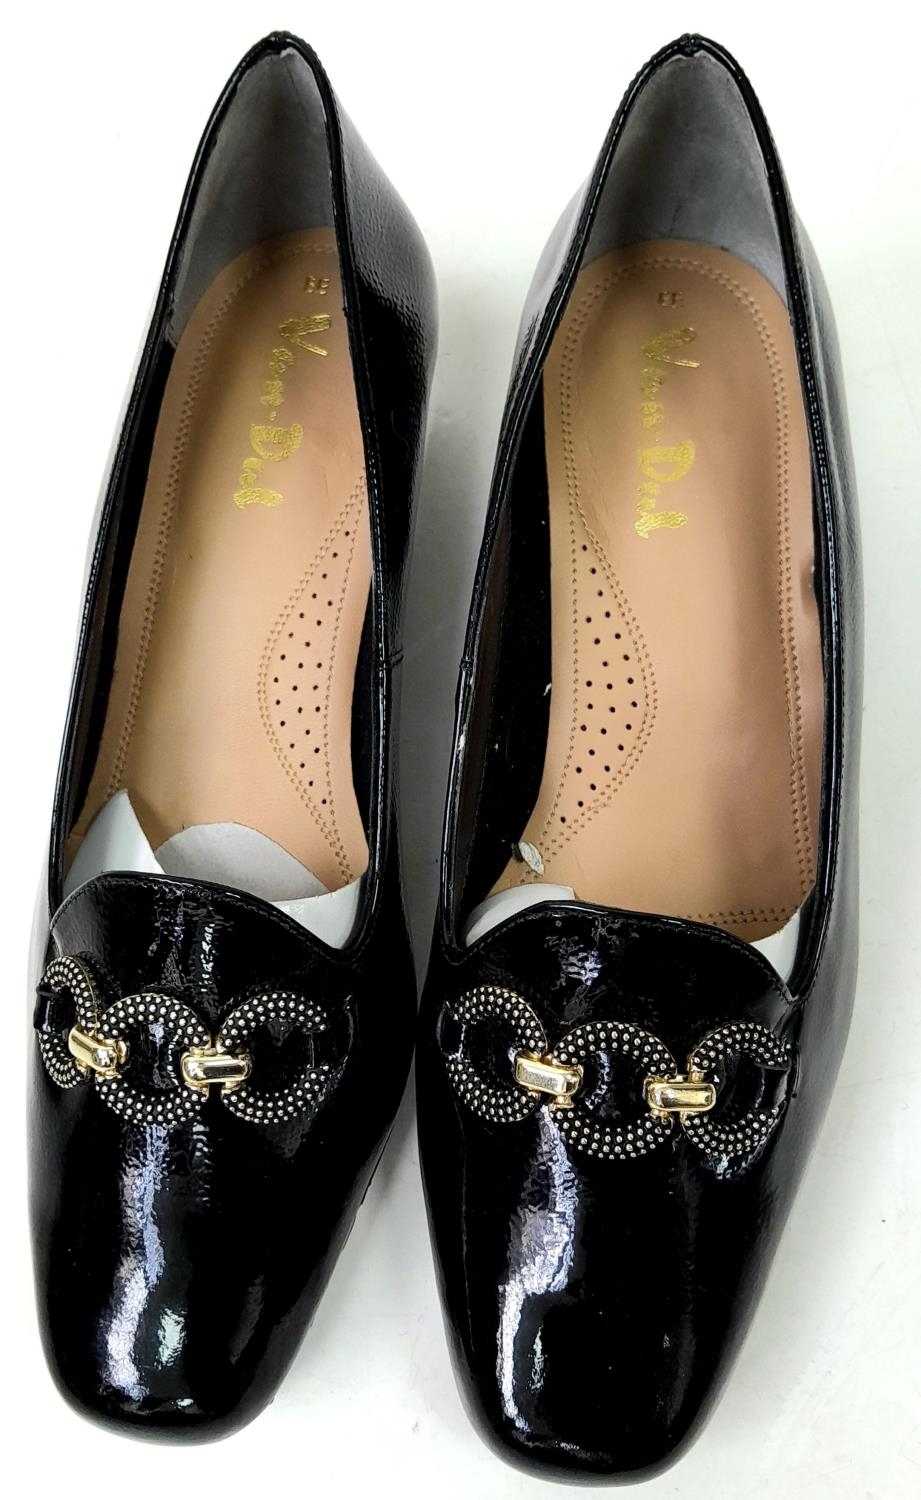 An Unused pair of "Twilight" lacquered ladies shoes by Van Dal, Size 5 ,1.5" heel. In box. - Image 3 of 10